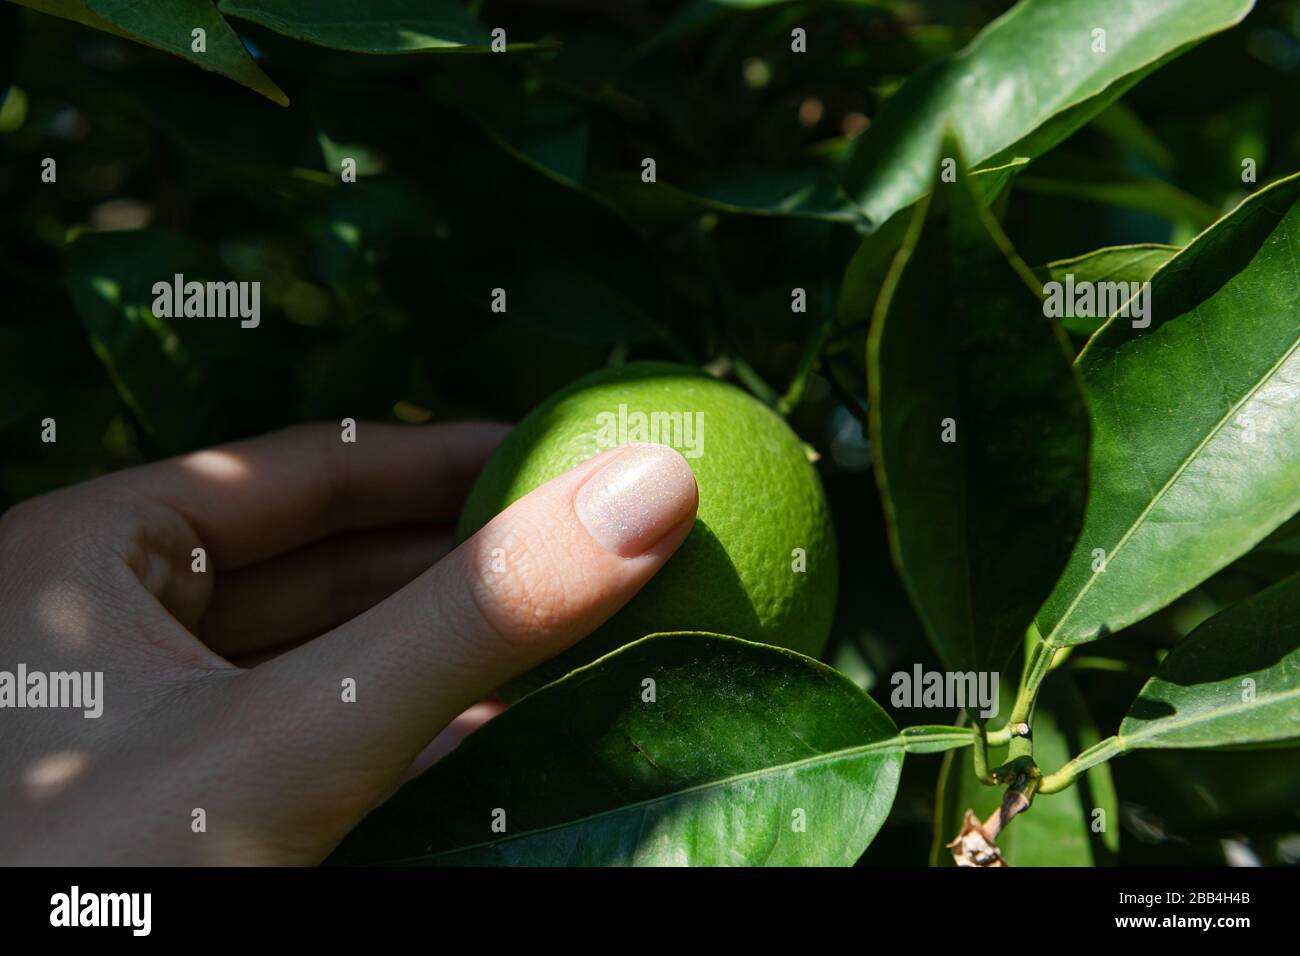 Green tangerines growing on a tree, close up Stock Photo